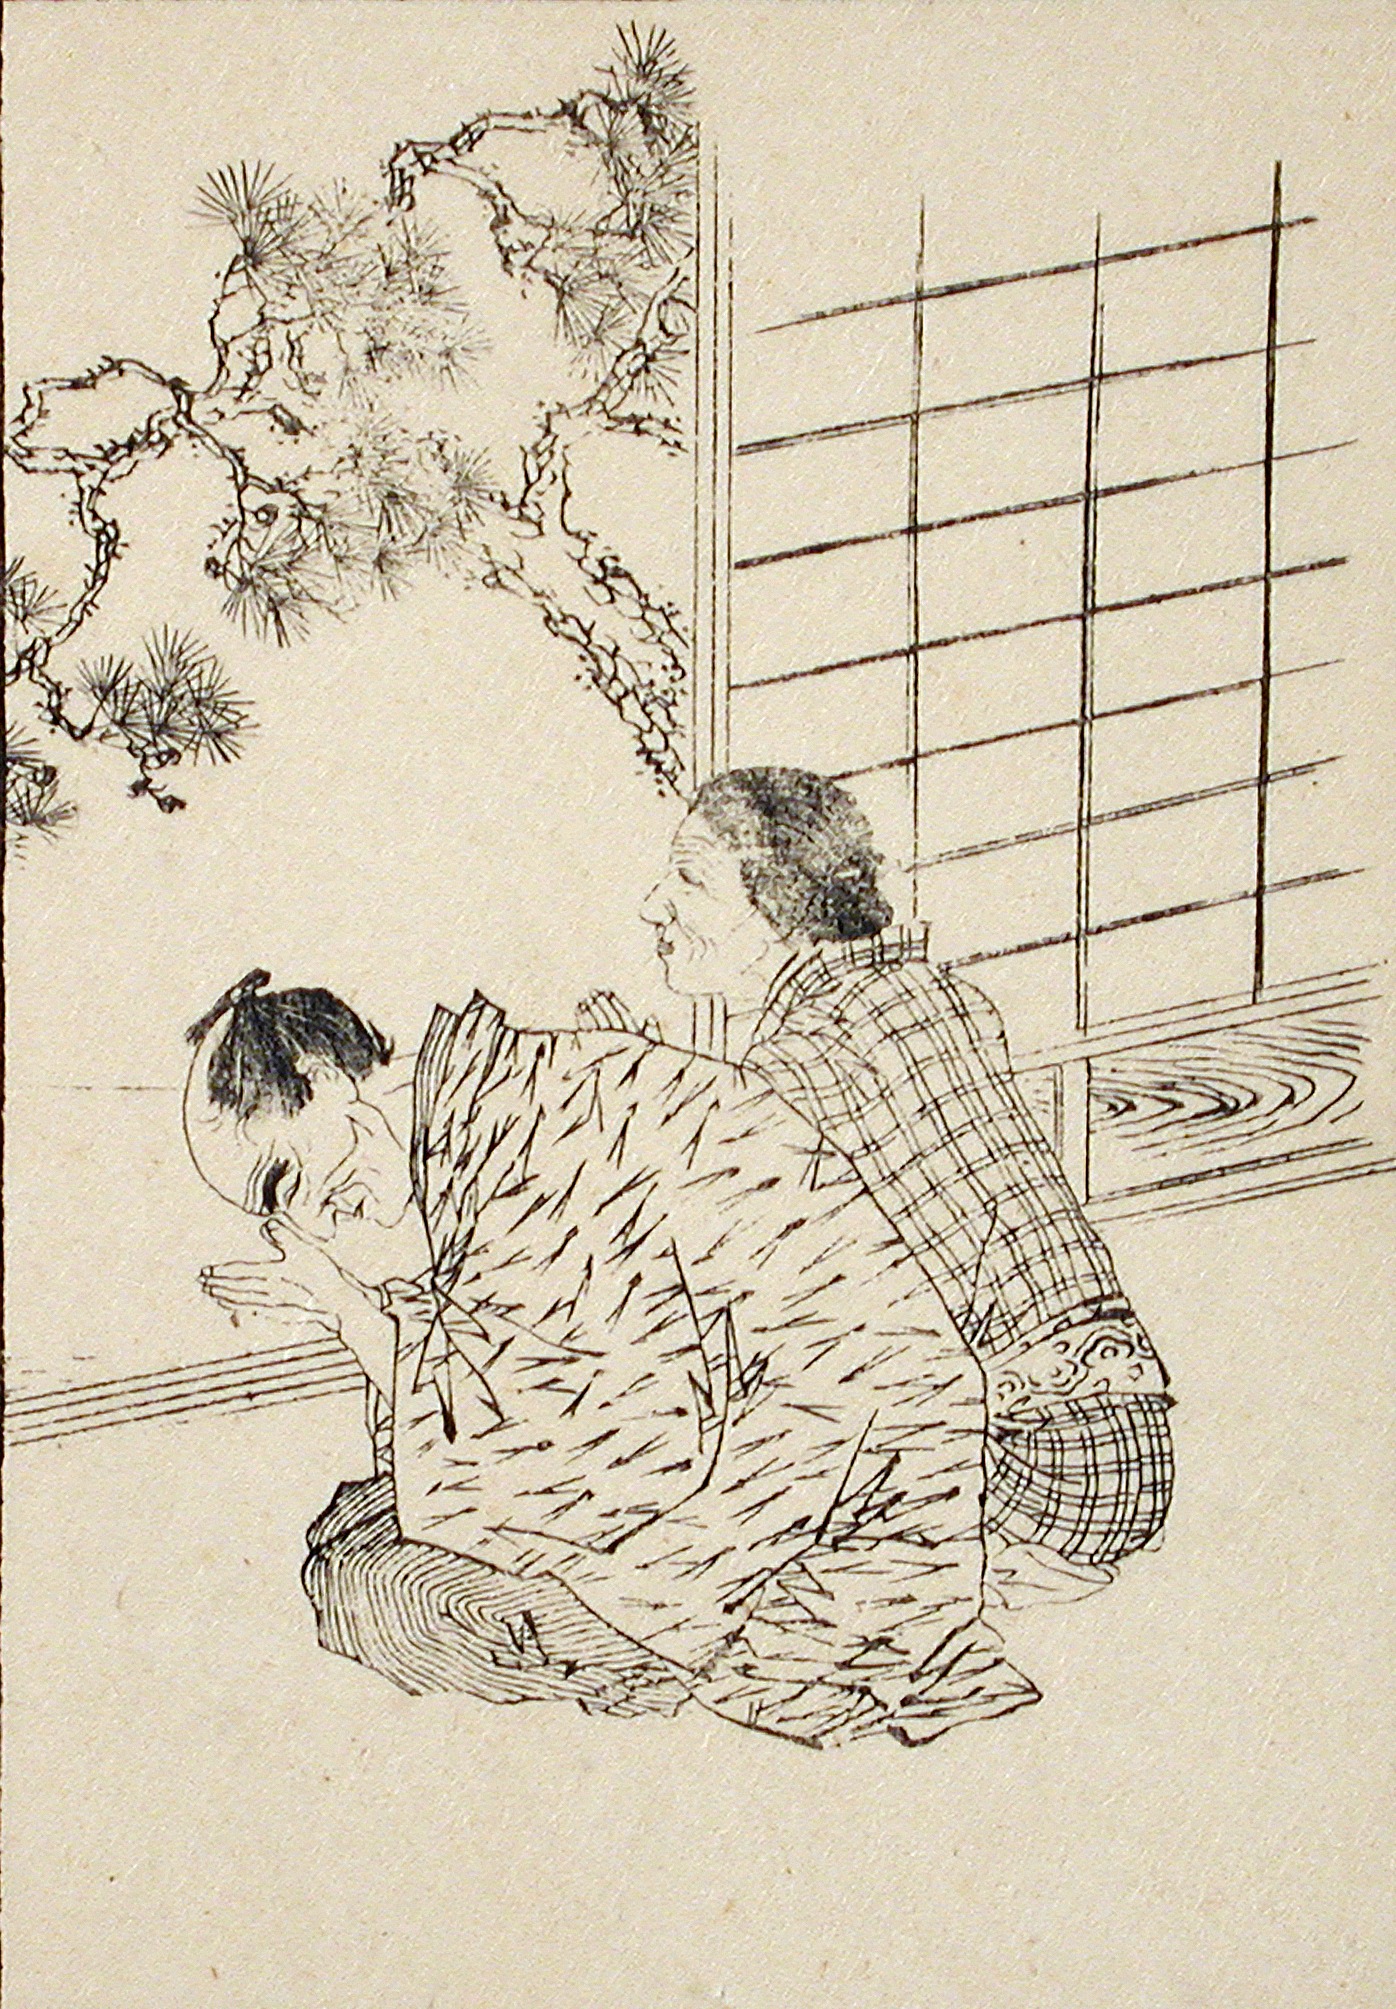 the drawing shows an asian woman in traditional clothes